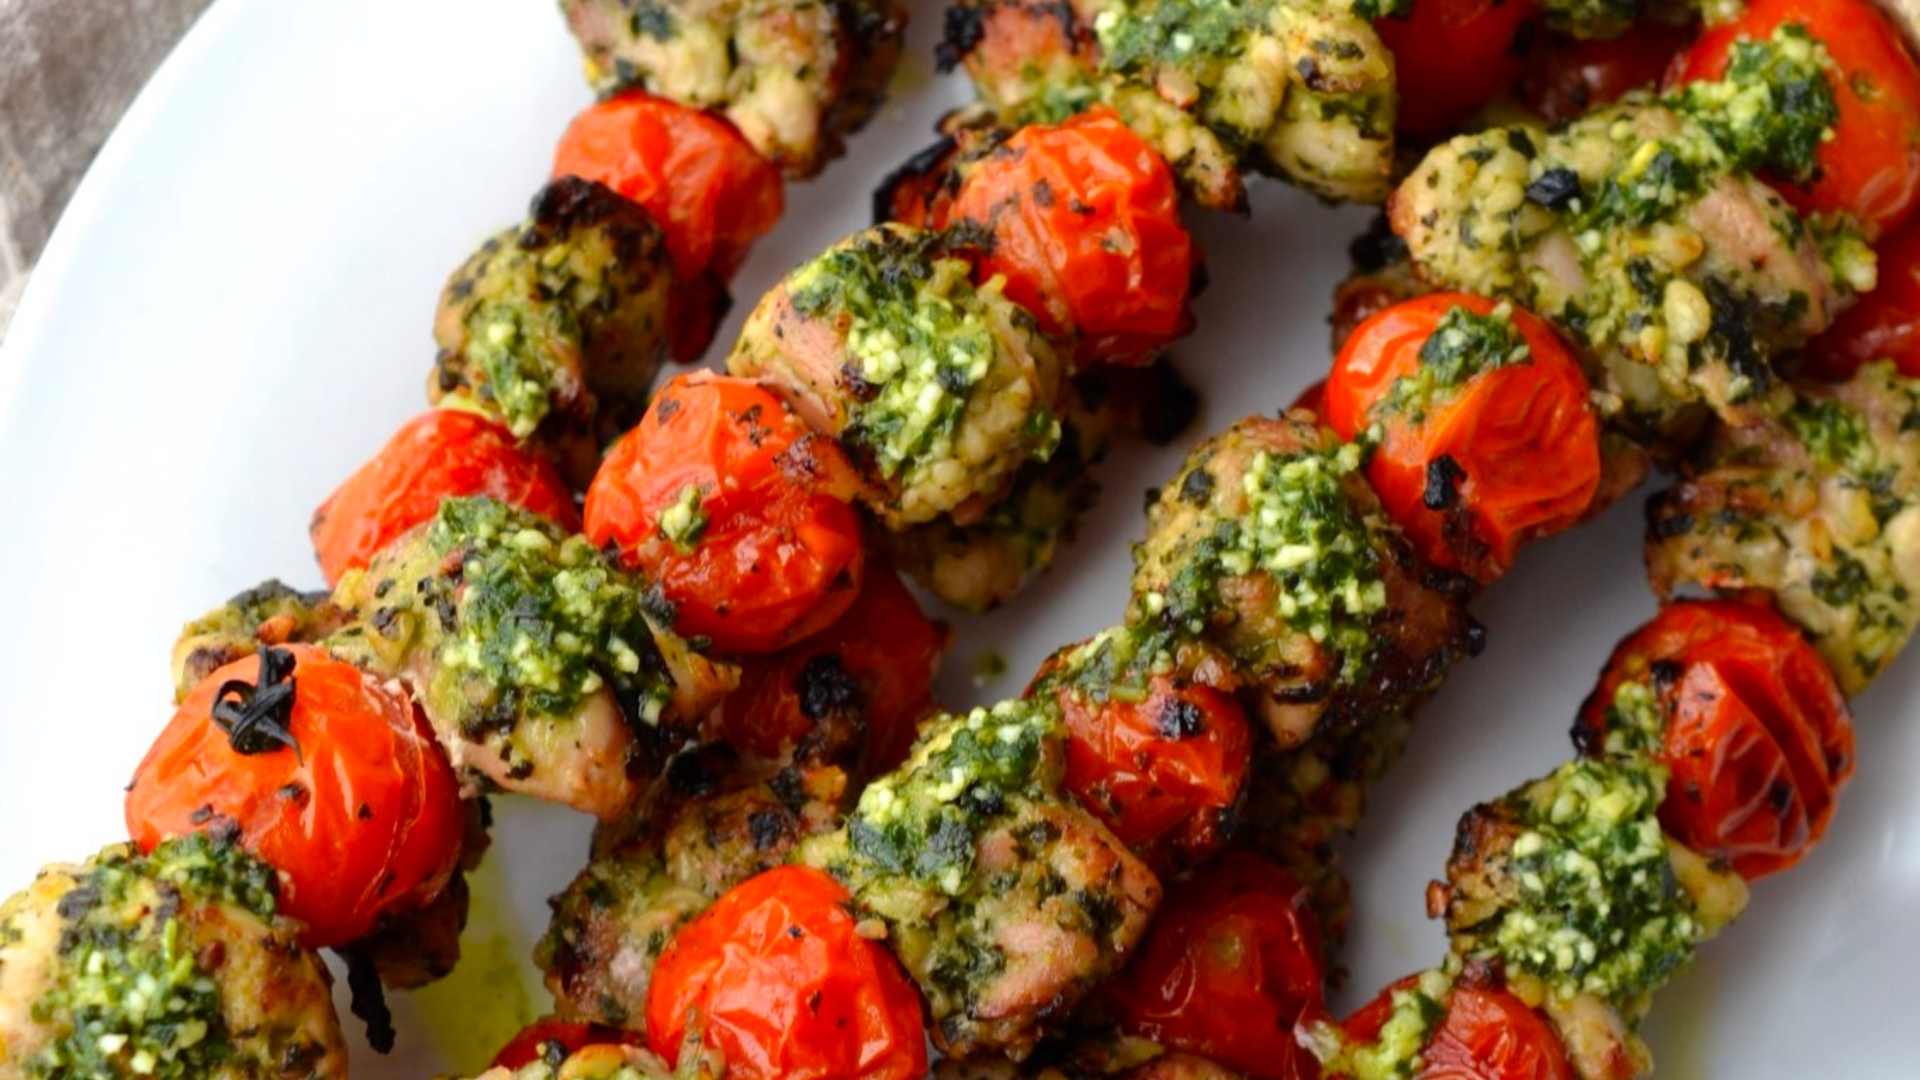 Fire Up the Grill for This Flavor-Packed Tomato Kebab Recipe A Favorite You Won't Want to Miss 3